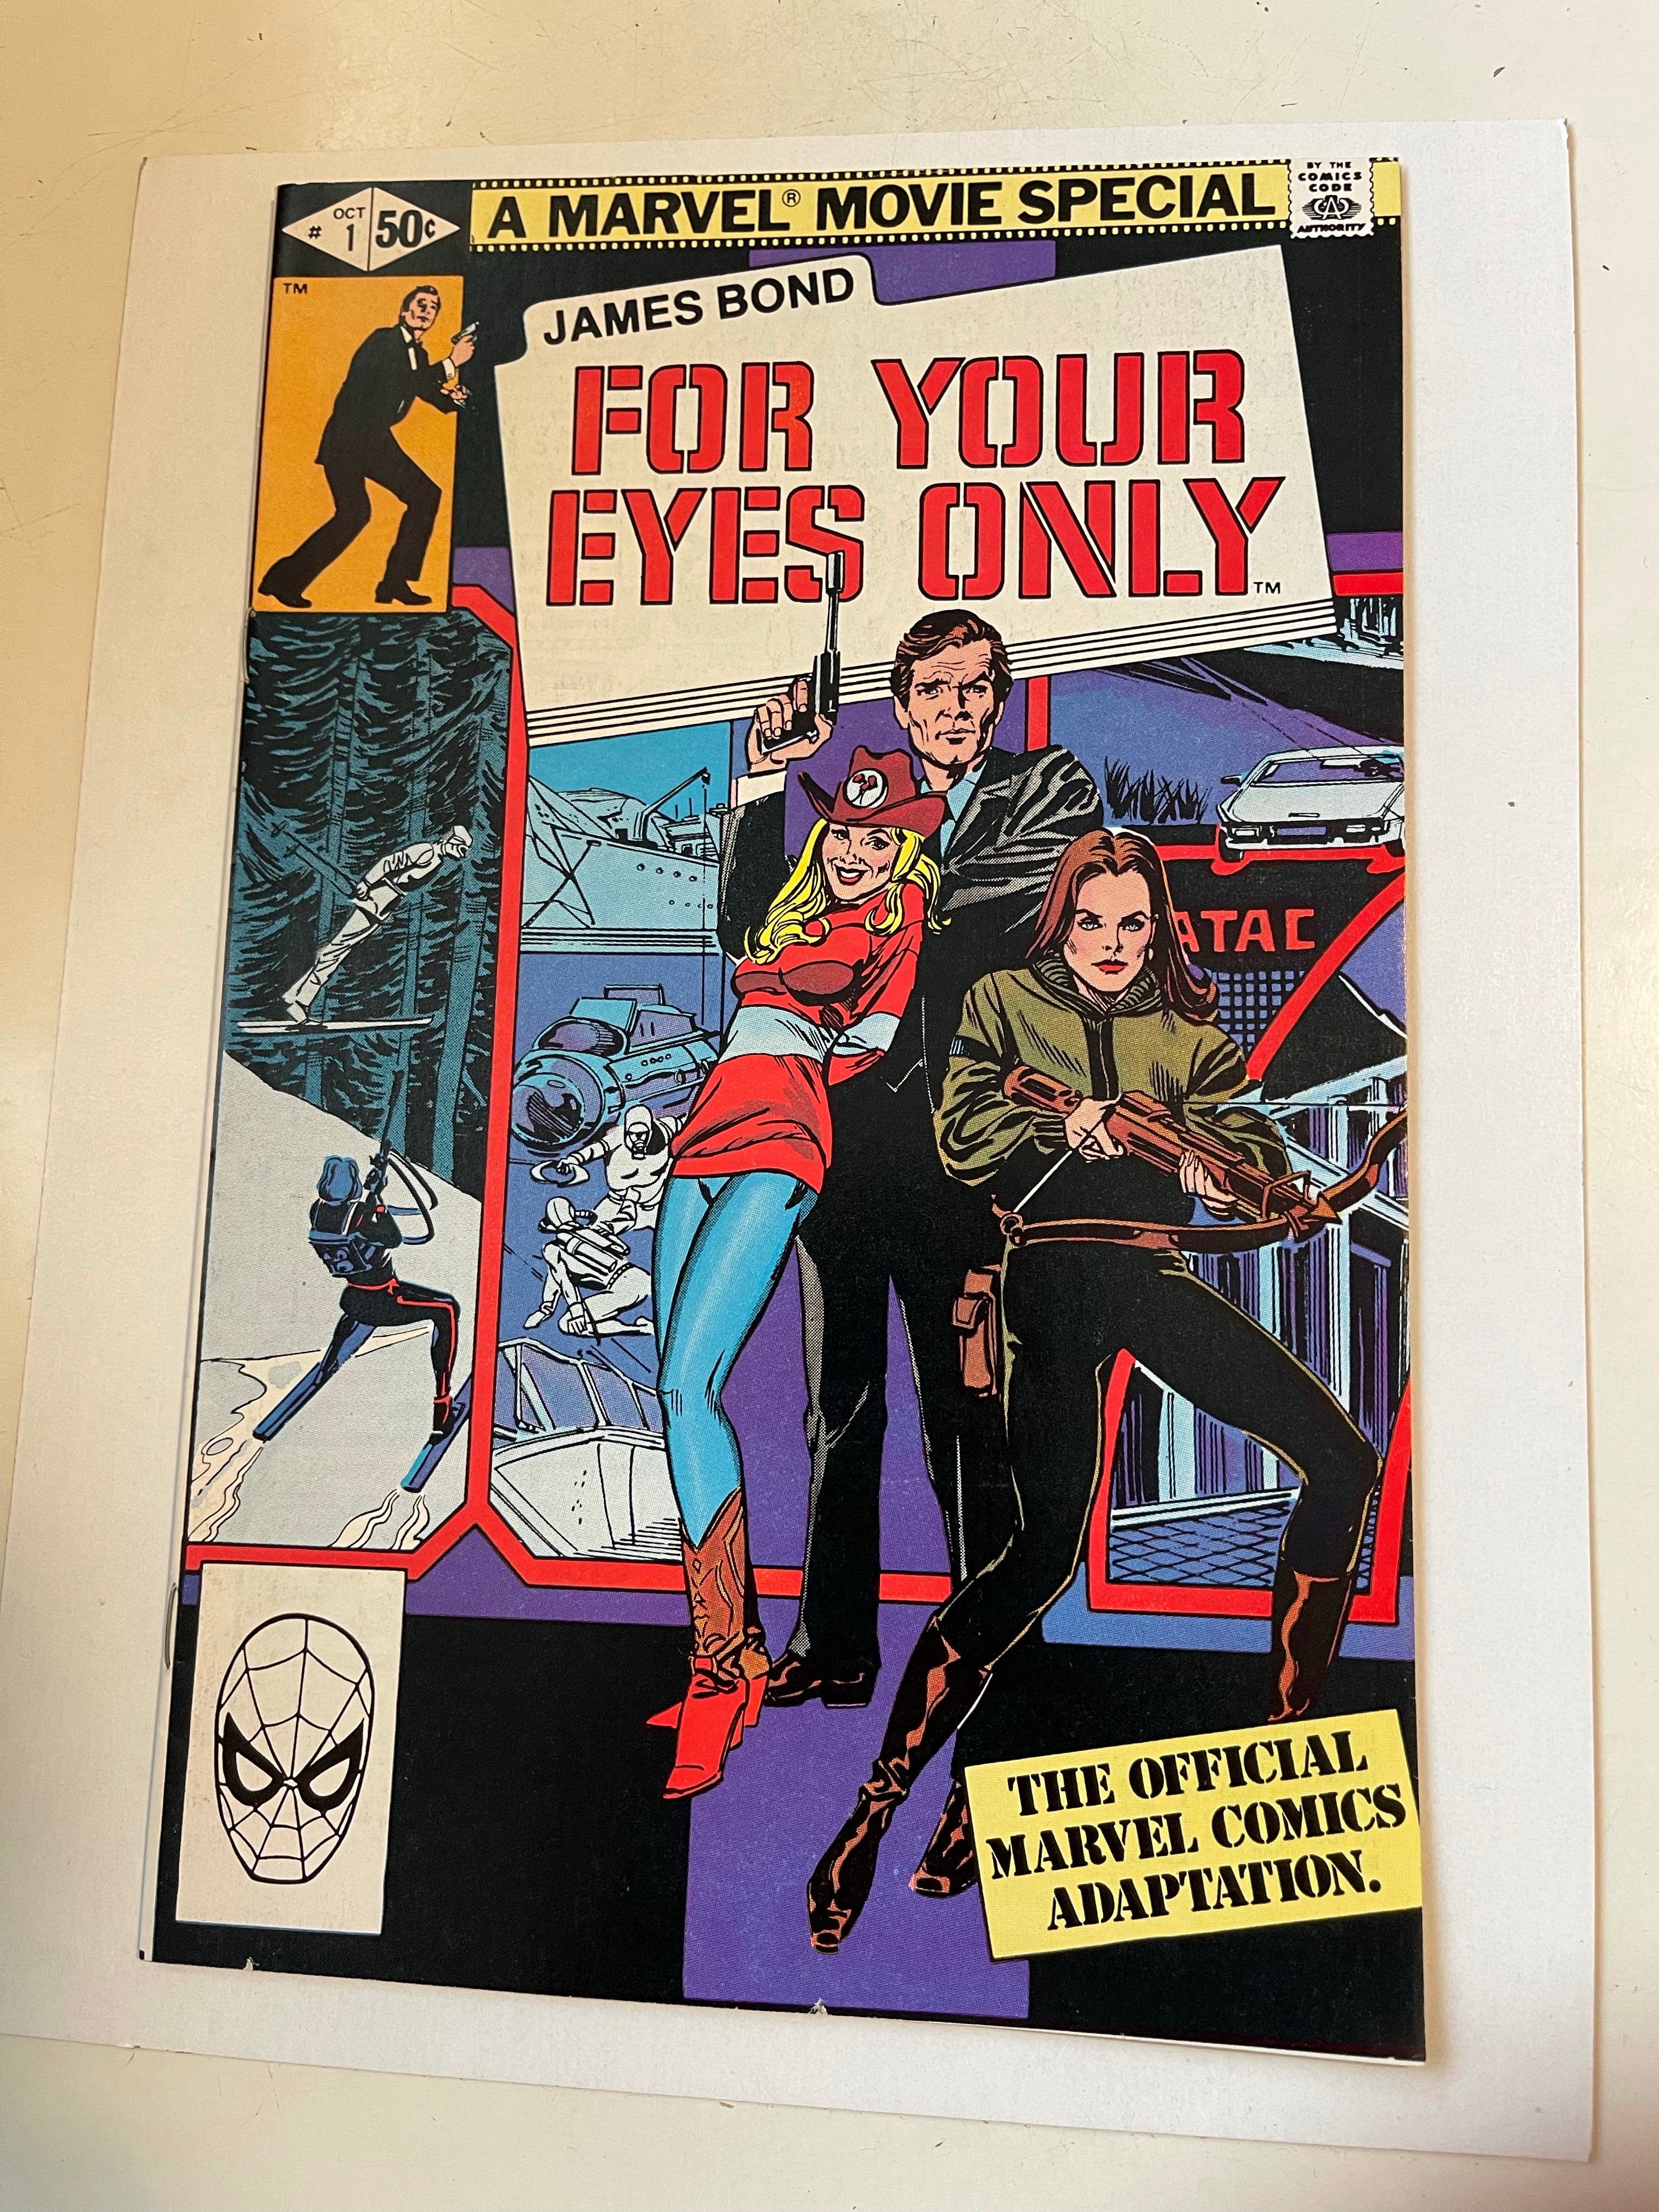 James Bond For Your Eyes Only #1 comic book